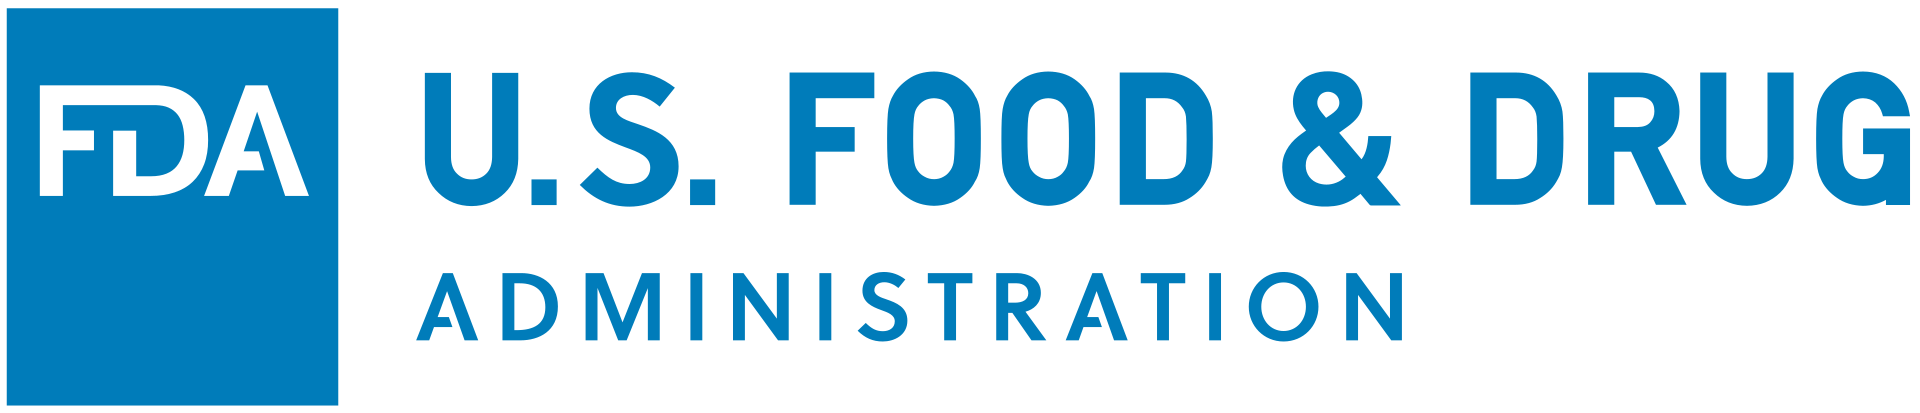 U.S. Food and Drug Administration logo, By Food and Drug Administration - https://www.fda.gov/downloads/AboutFDA/AboutThisWebsite/WebsitePolicies/UCM519160.pdf, Public Domain, https://commons.wikimedia.org/w/index.php?curid=58310575"